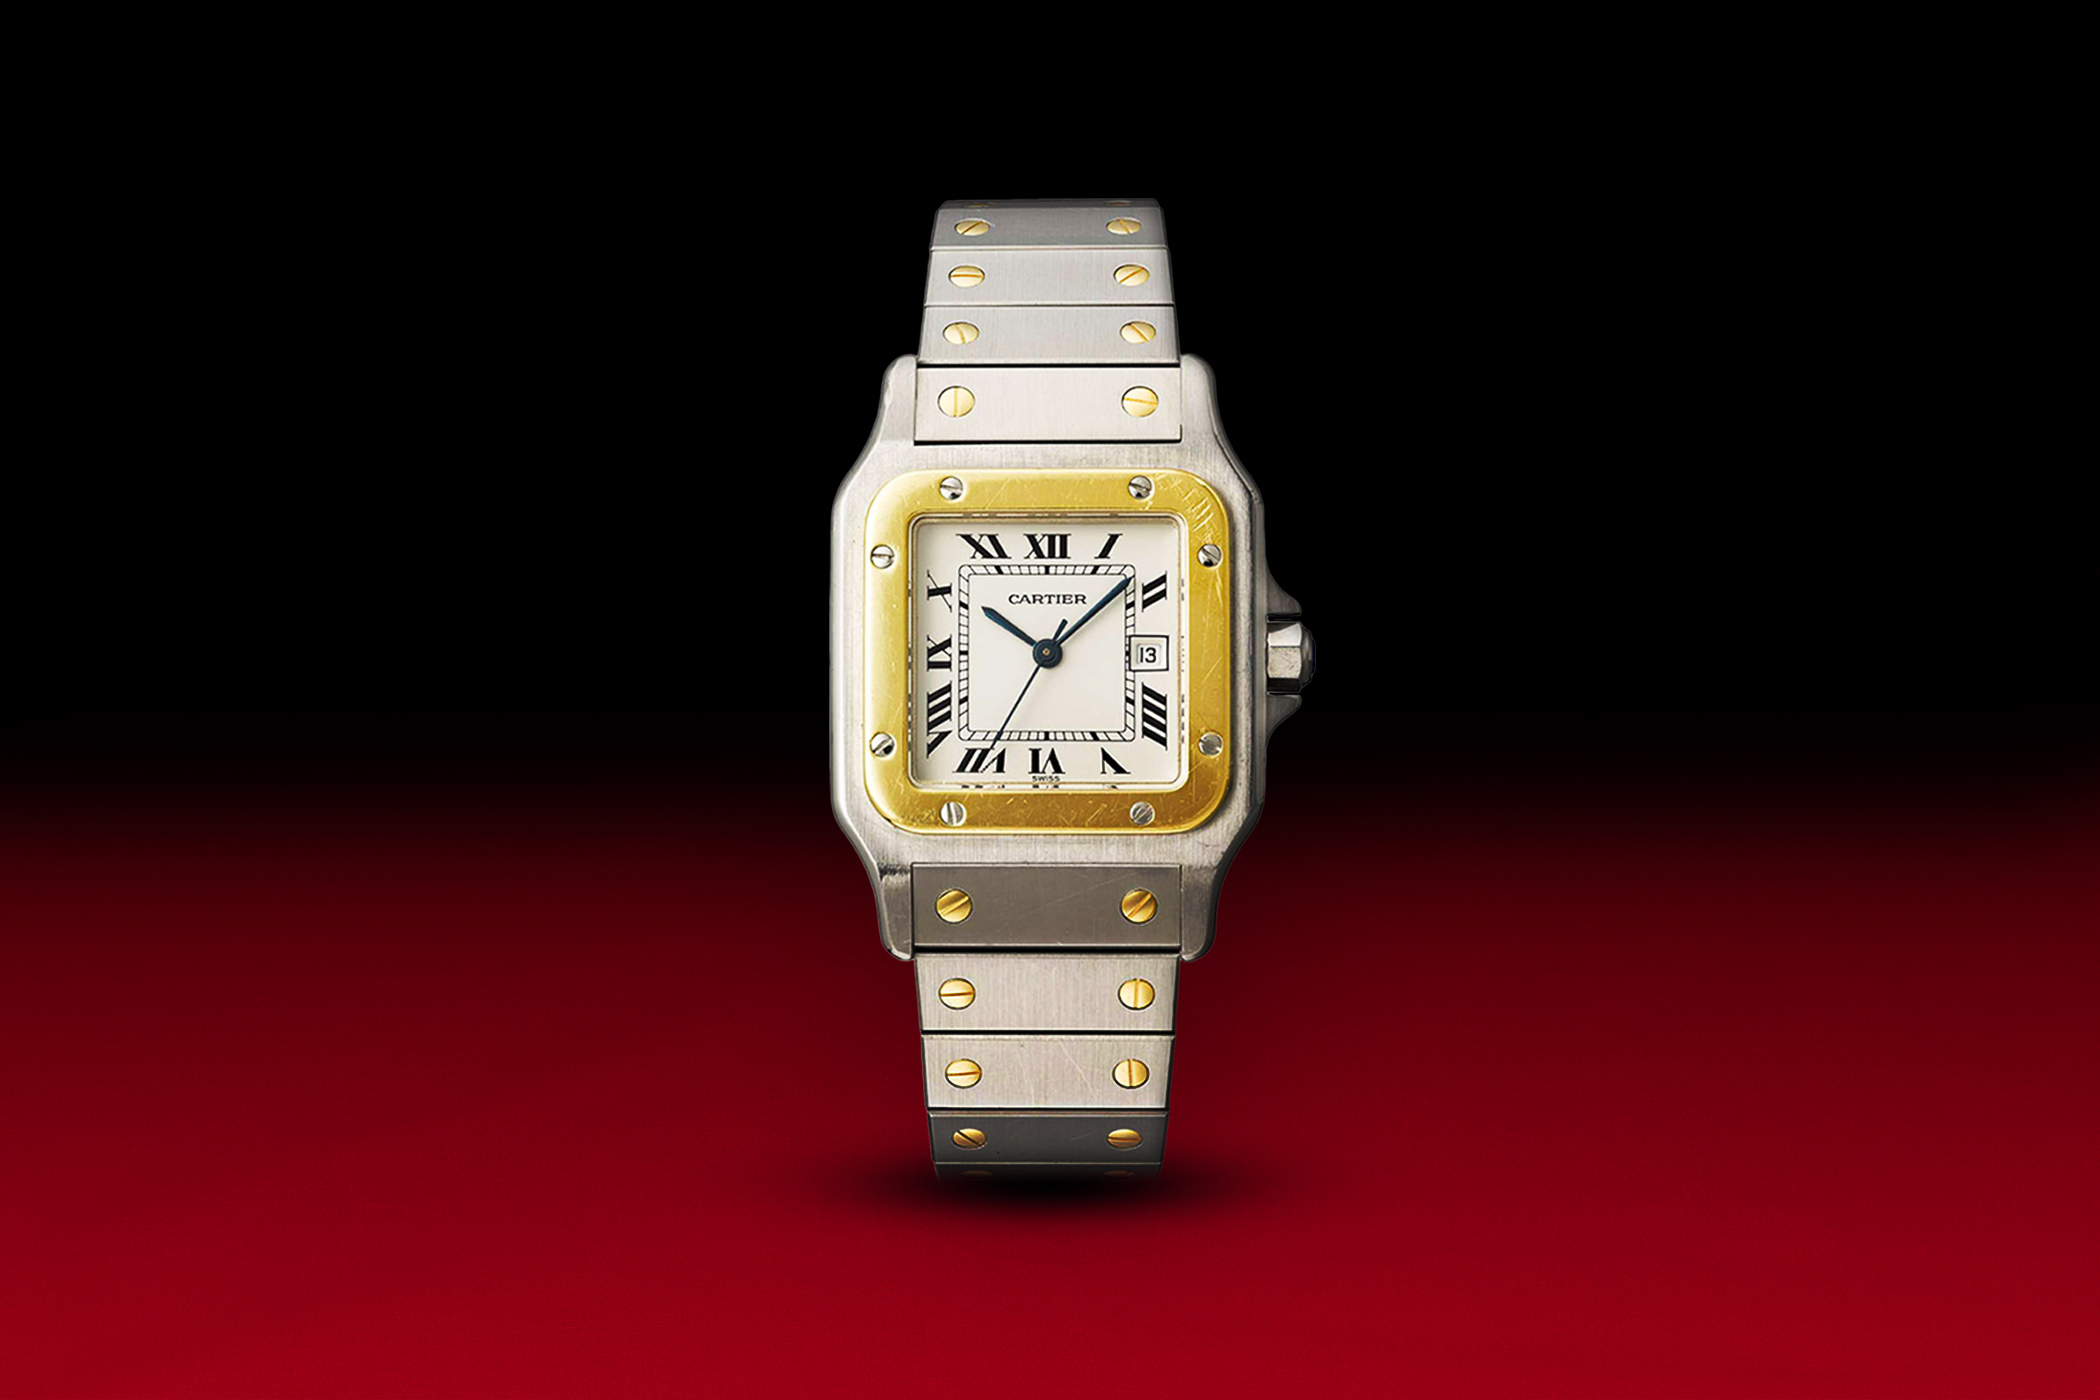 Cartier: An Iconic Luxury Brand at the Right Place at the Right